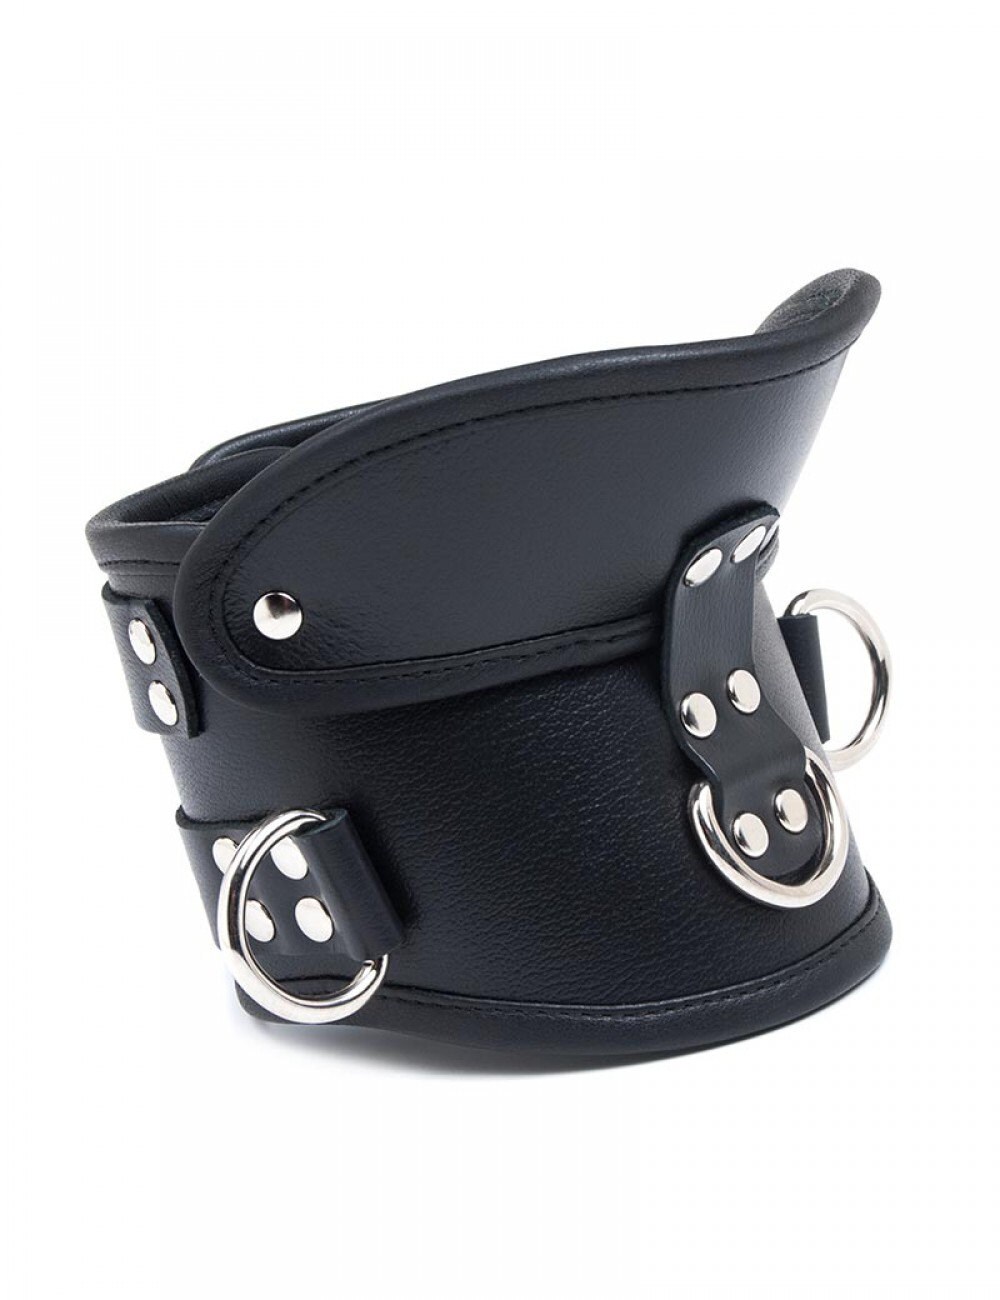 BDSM Posture Collar Deluxe Padded Leather 